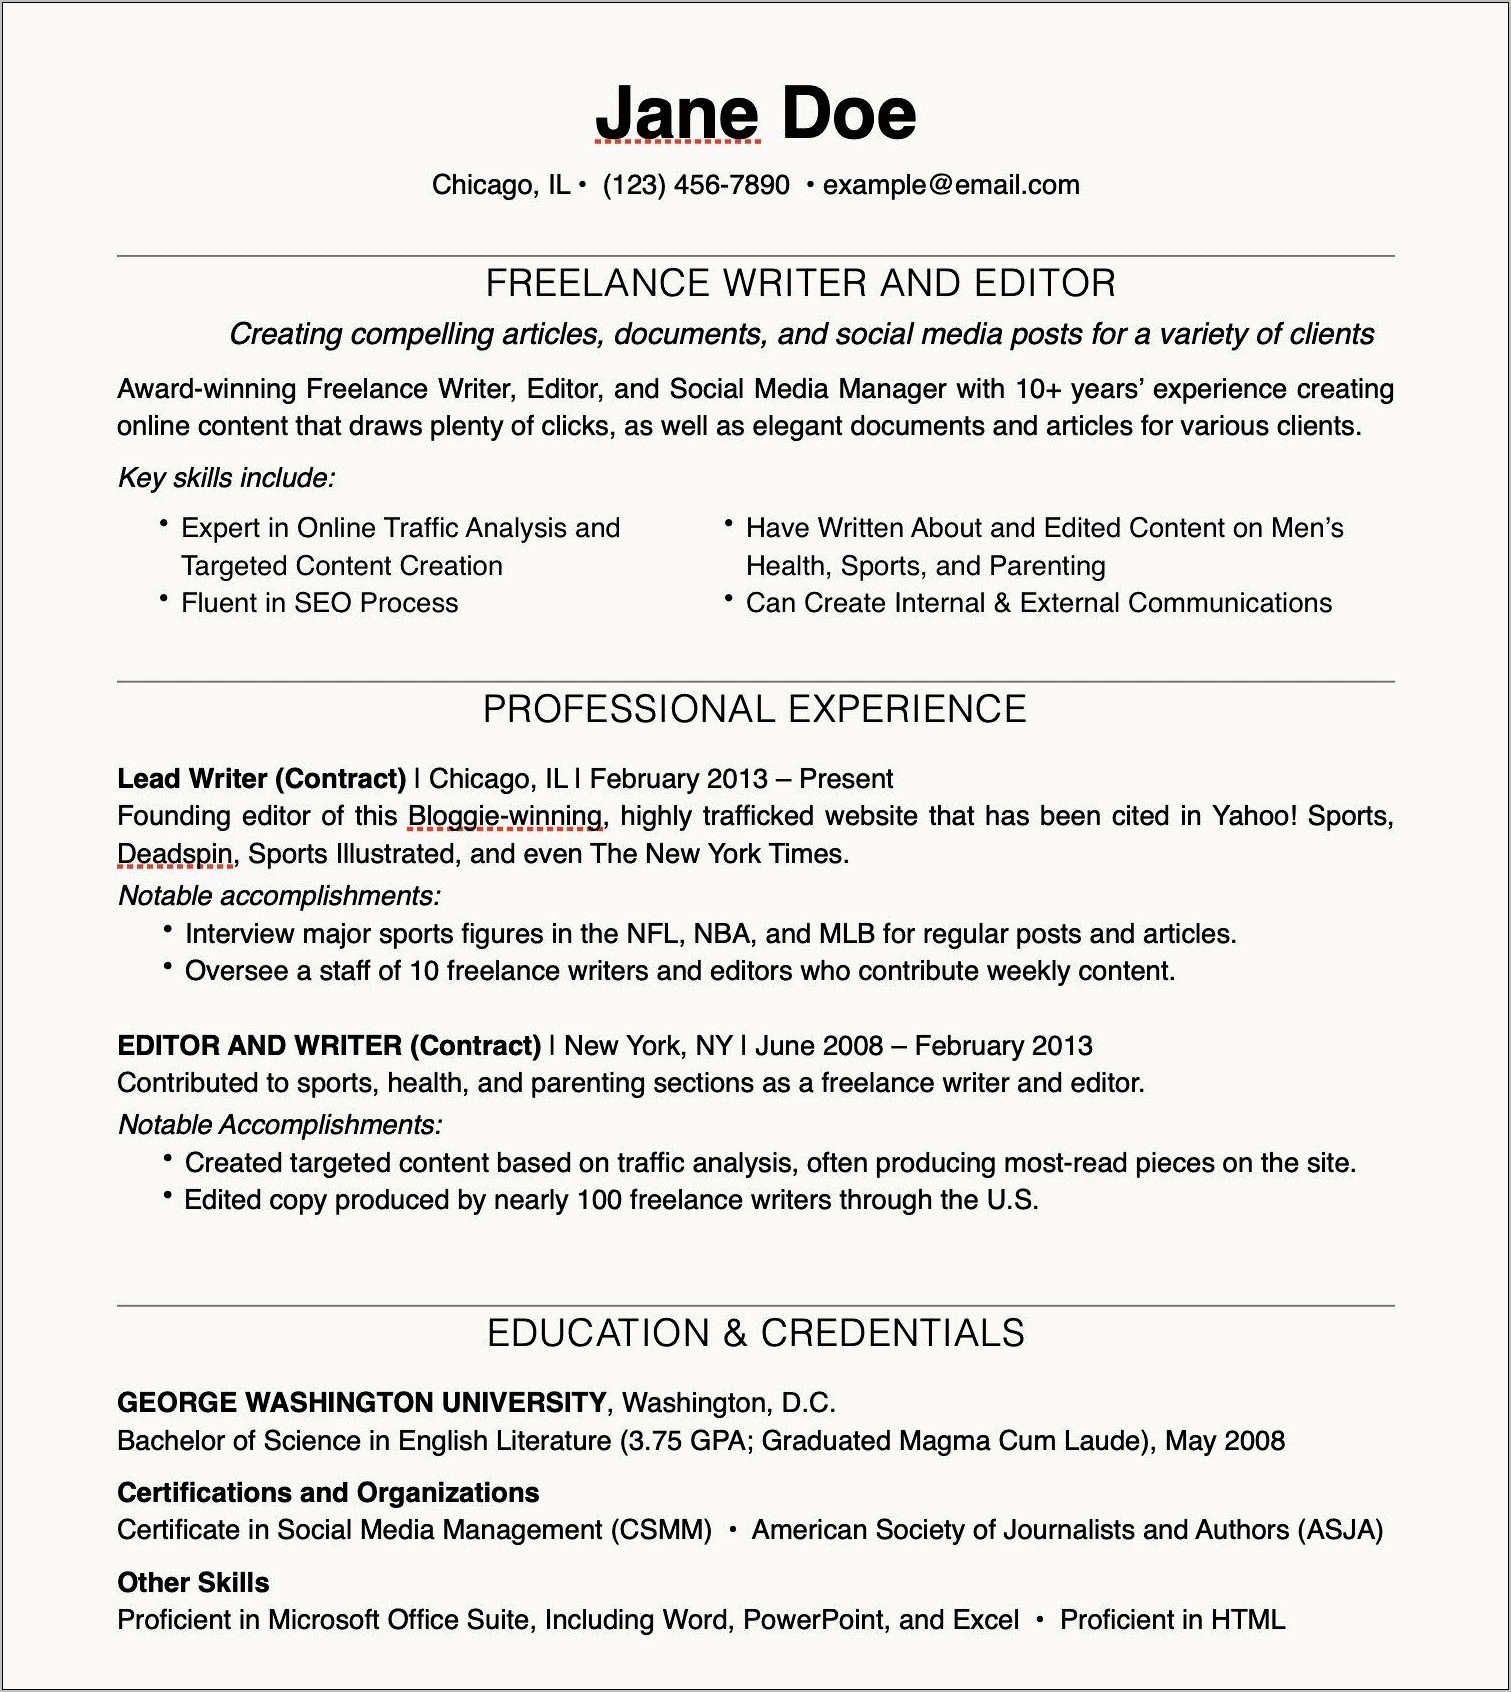 Sample Resume With Startup Experience